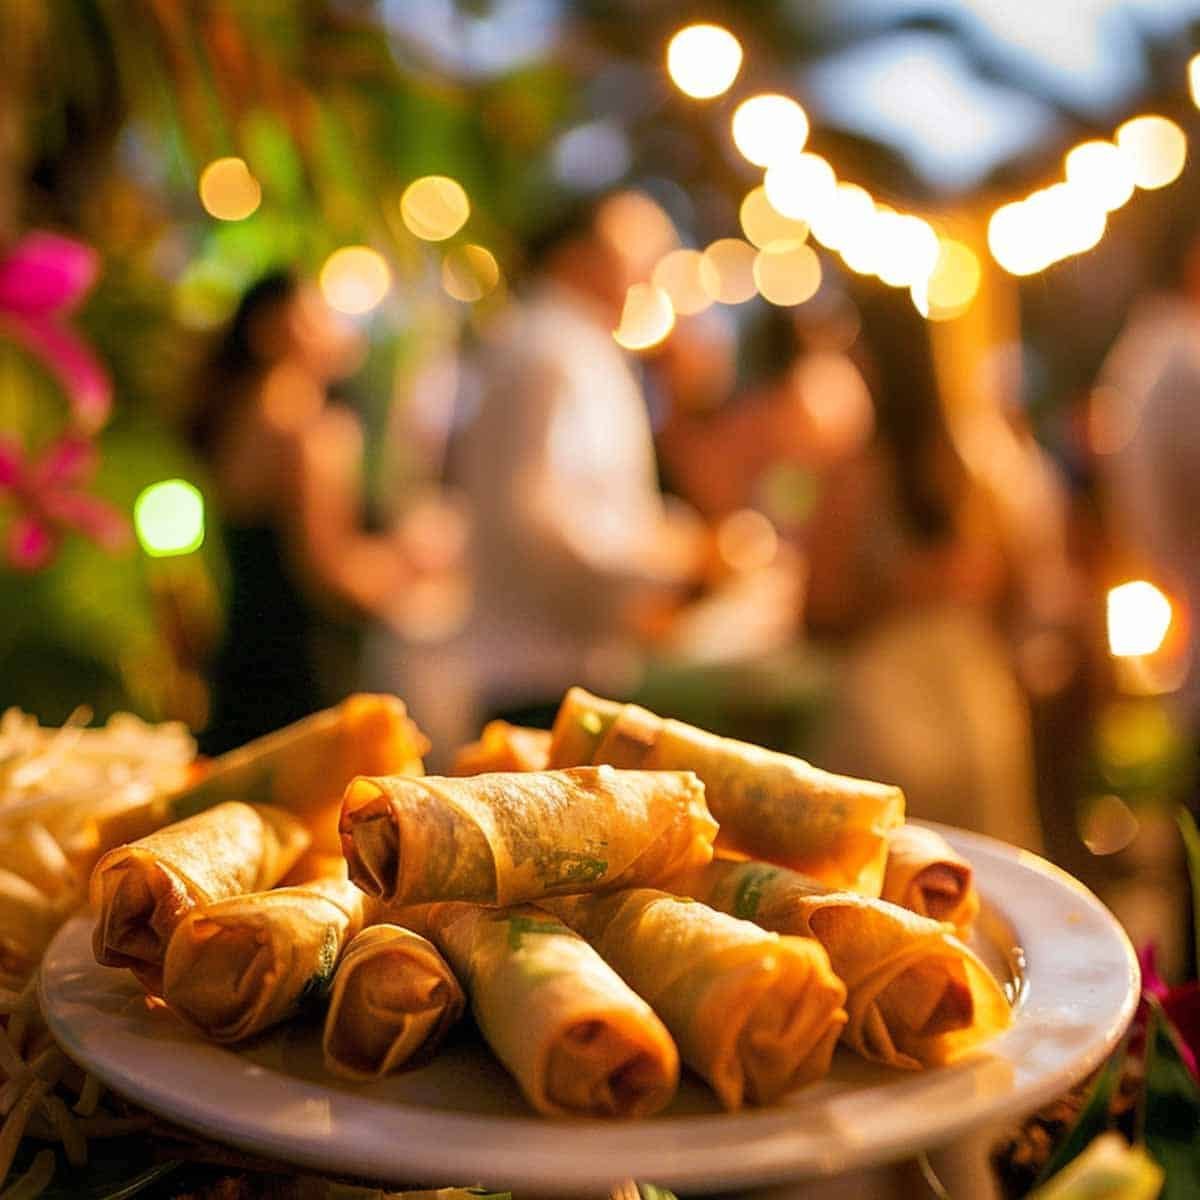 Thai Freid Spring rolls Also Known at Por Pia Tod being served at a party